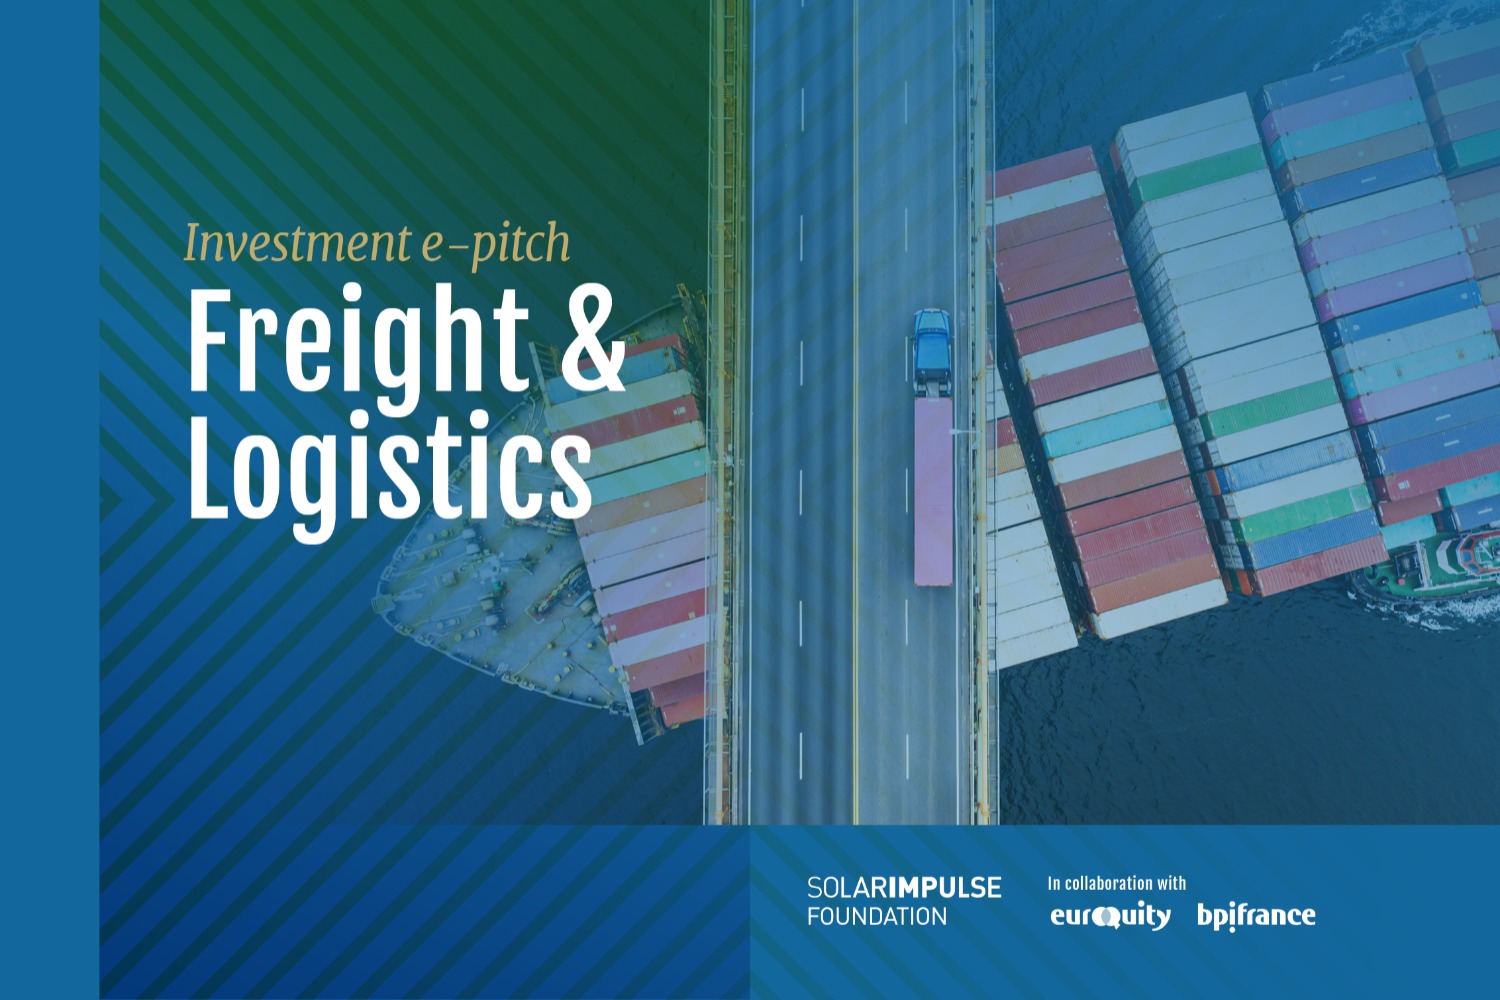 Freight & Logistics | Investment e-pitch